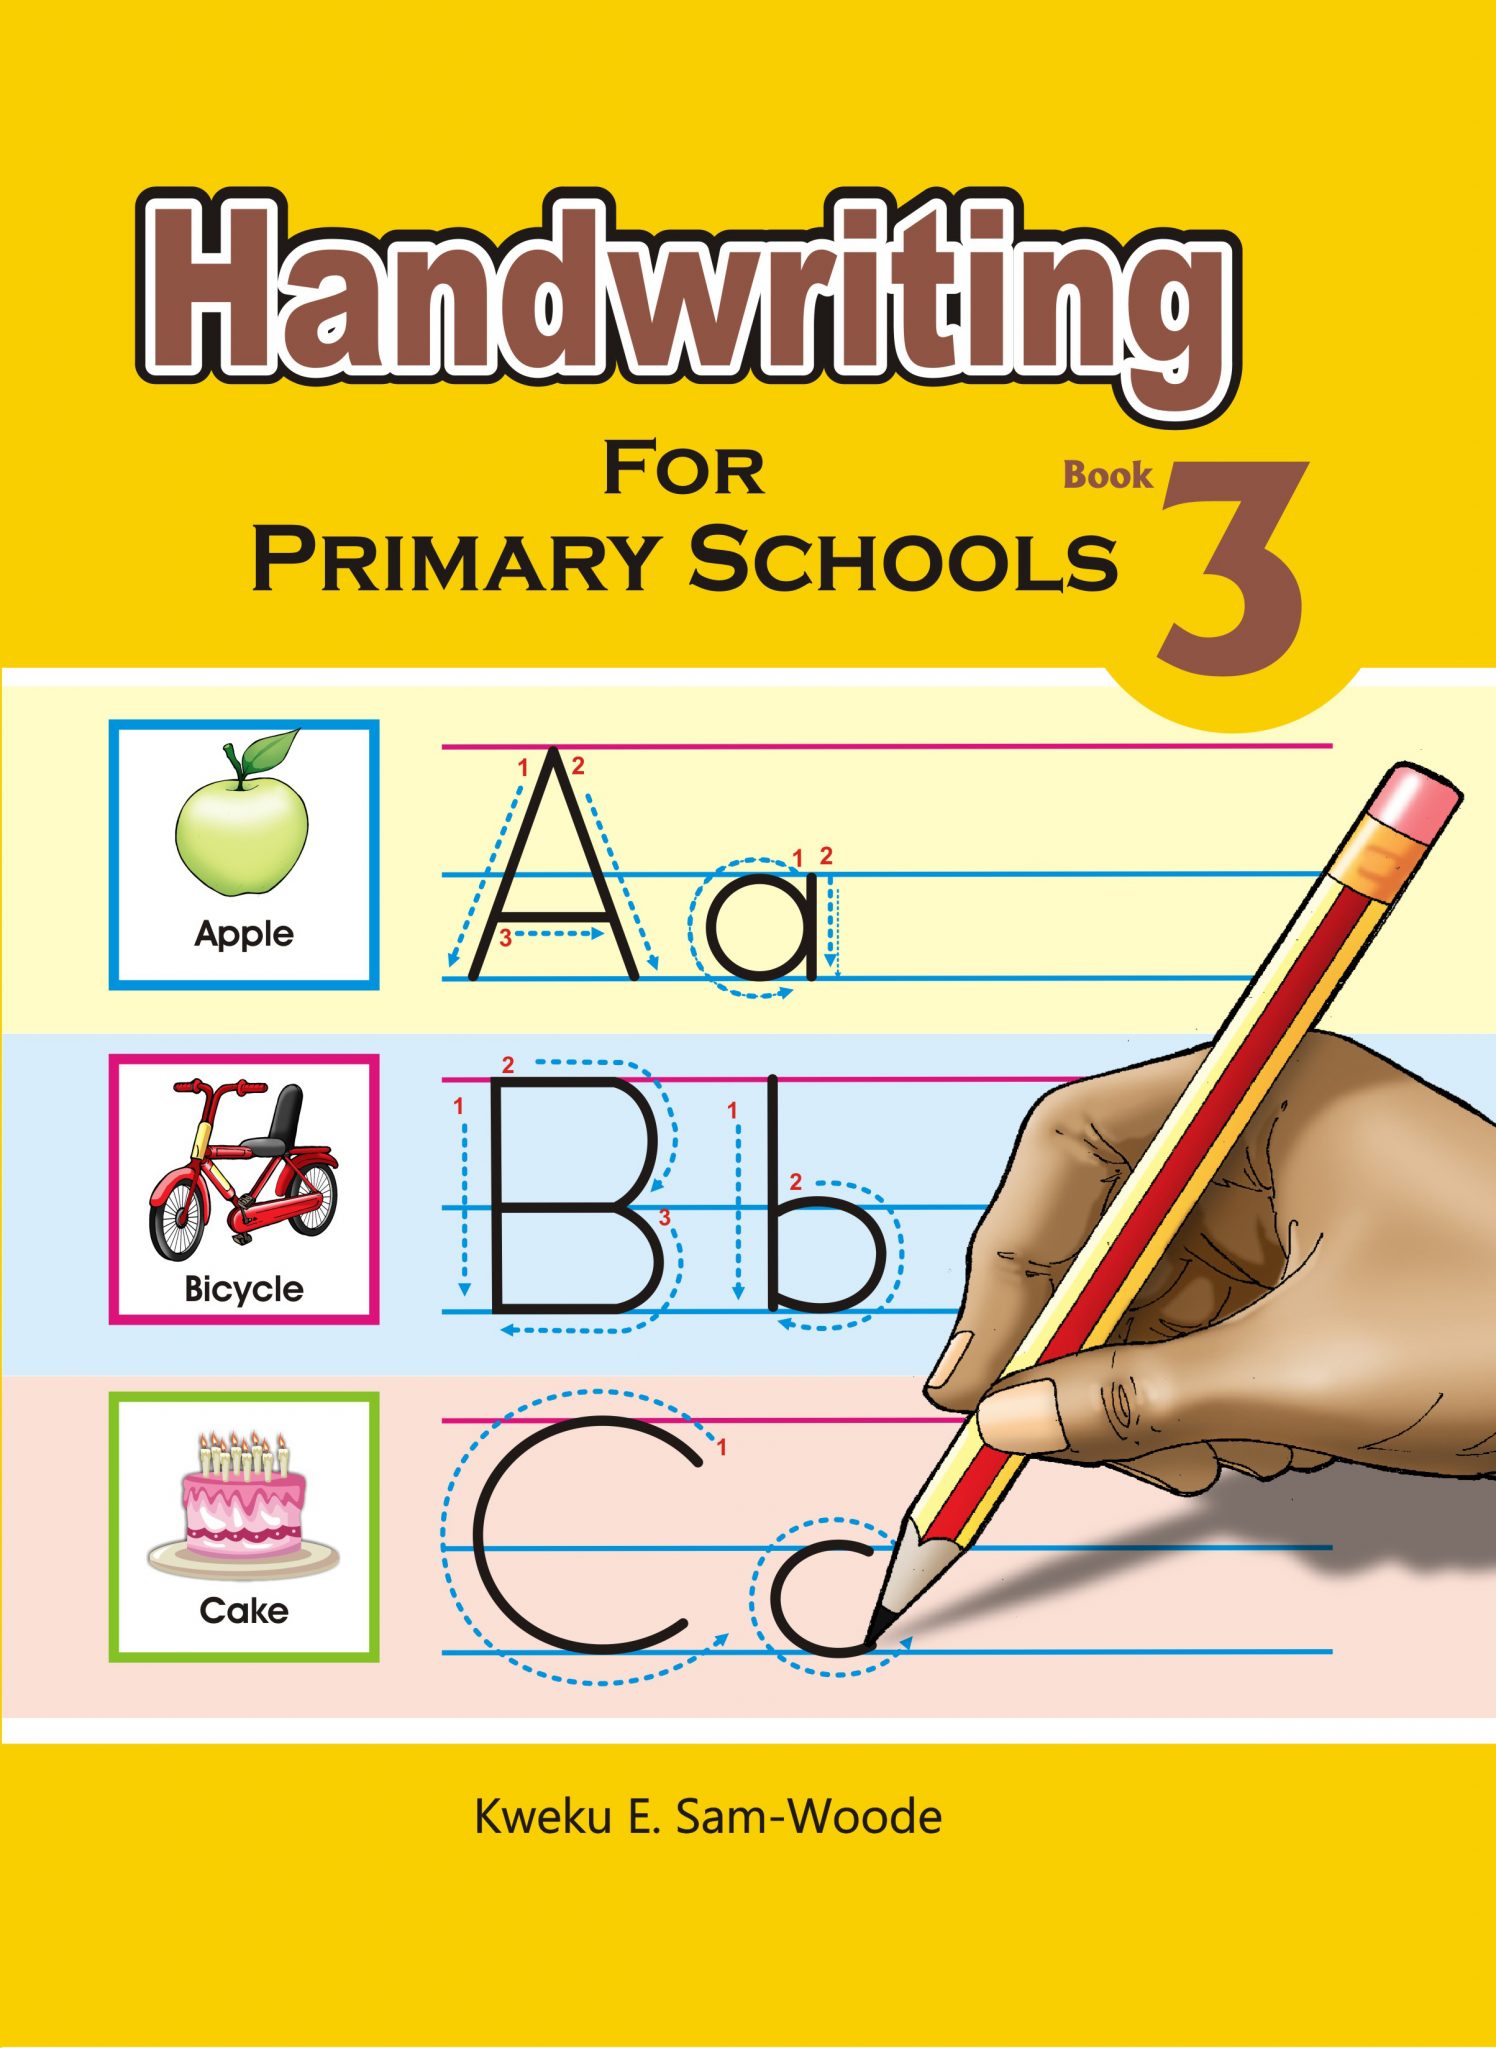 handwriting-book-3-west-african-book-publishers-limited